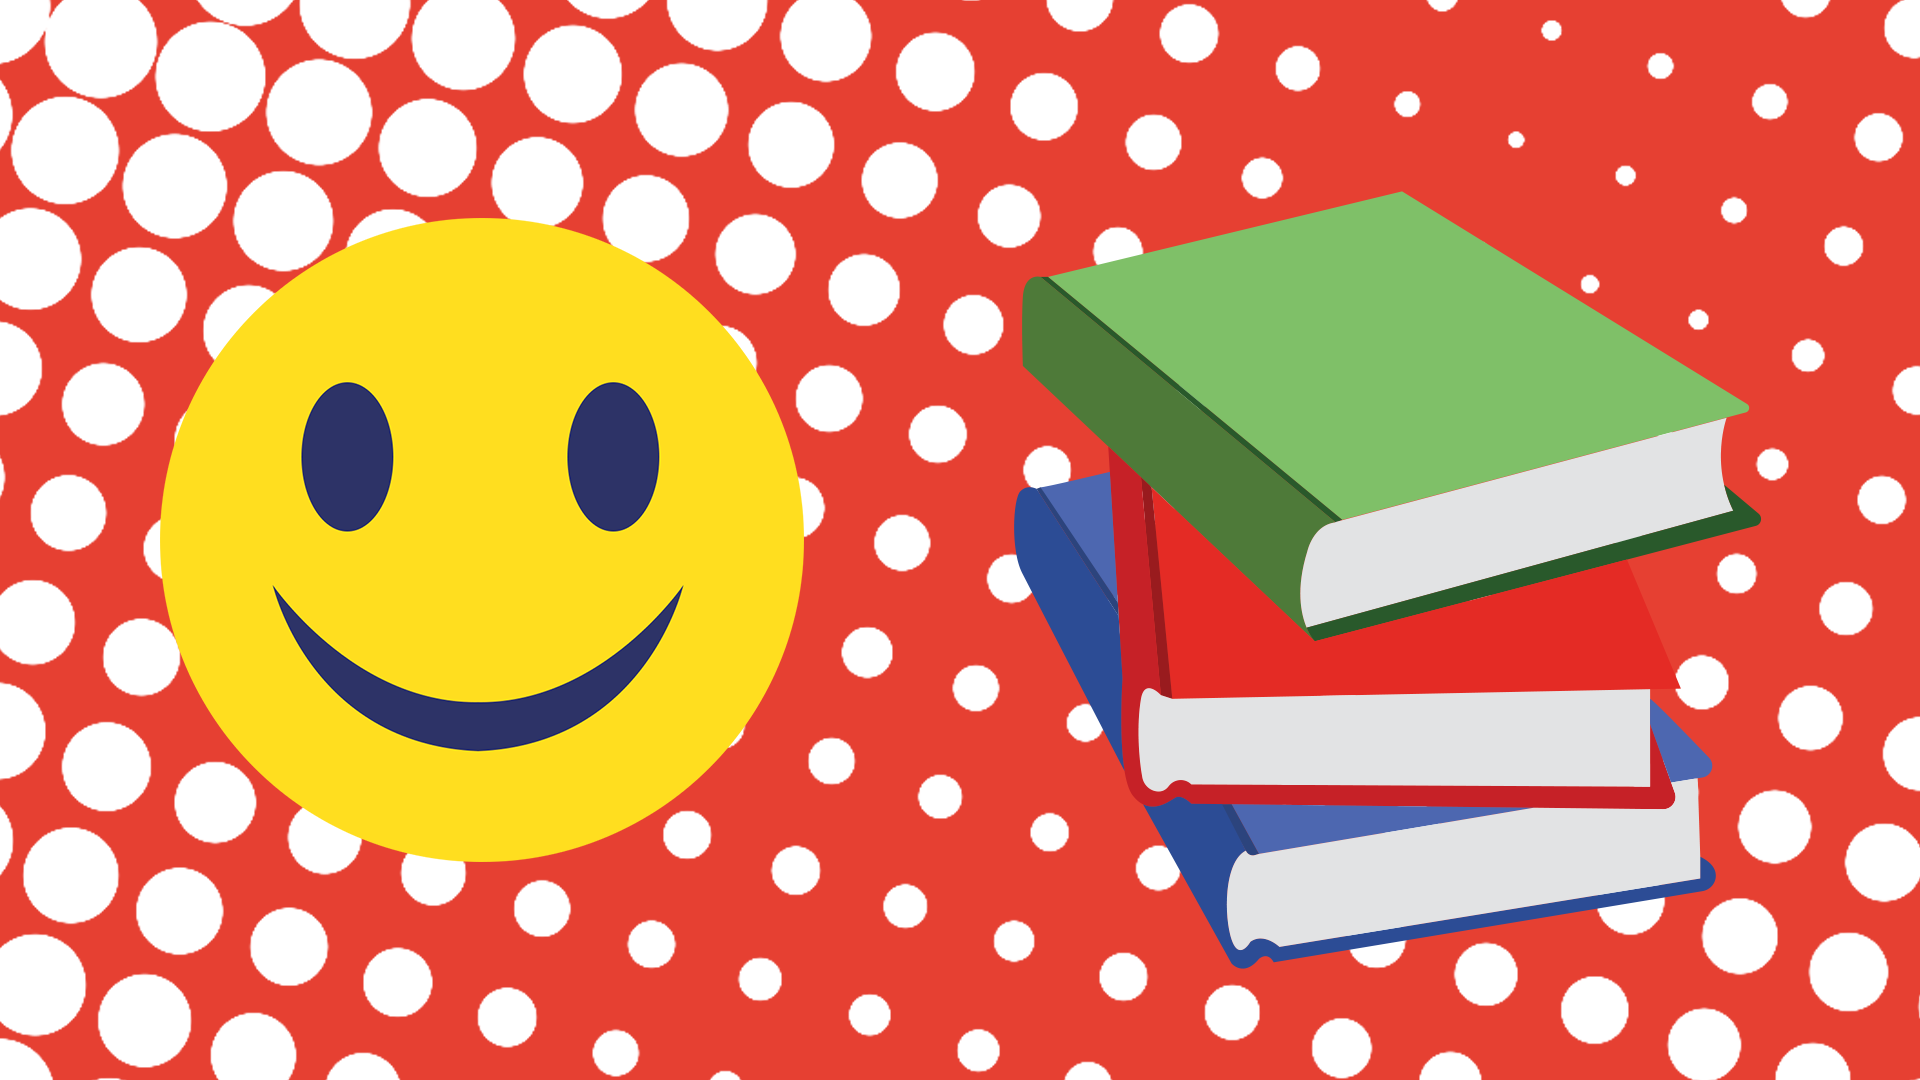 A smiley face and books emoji